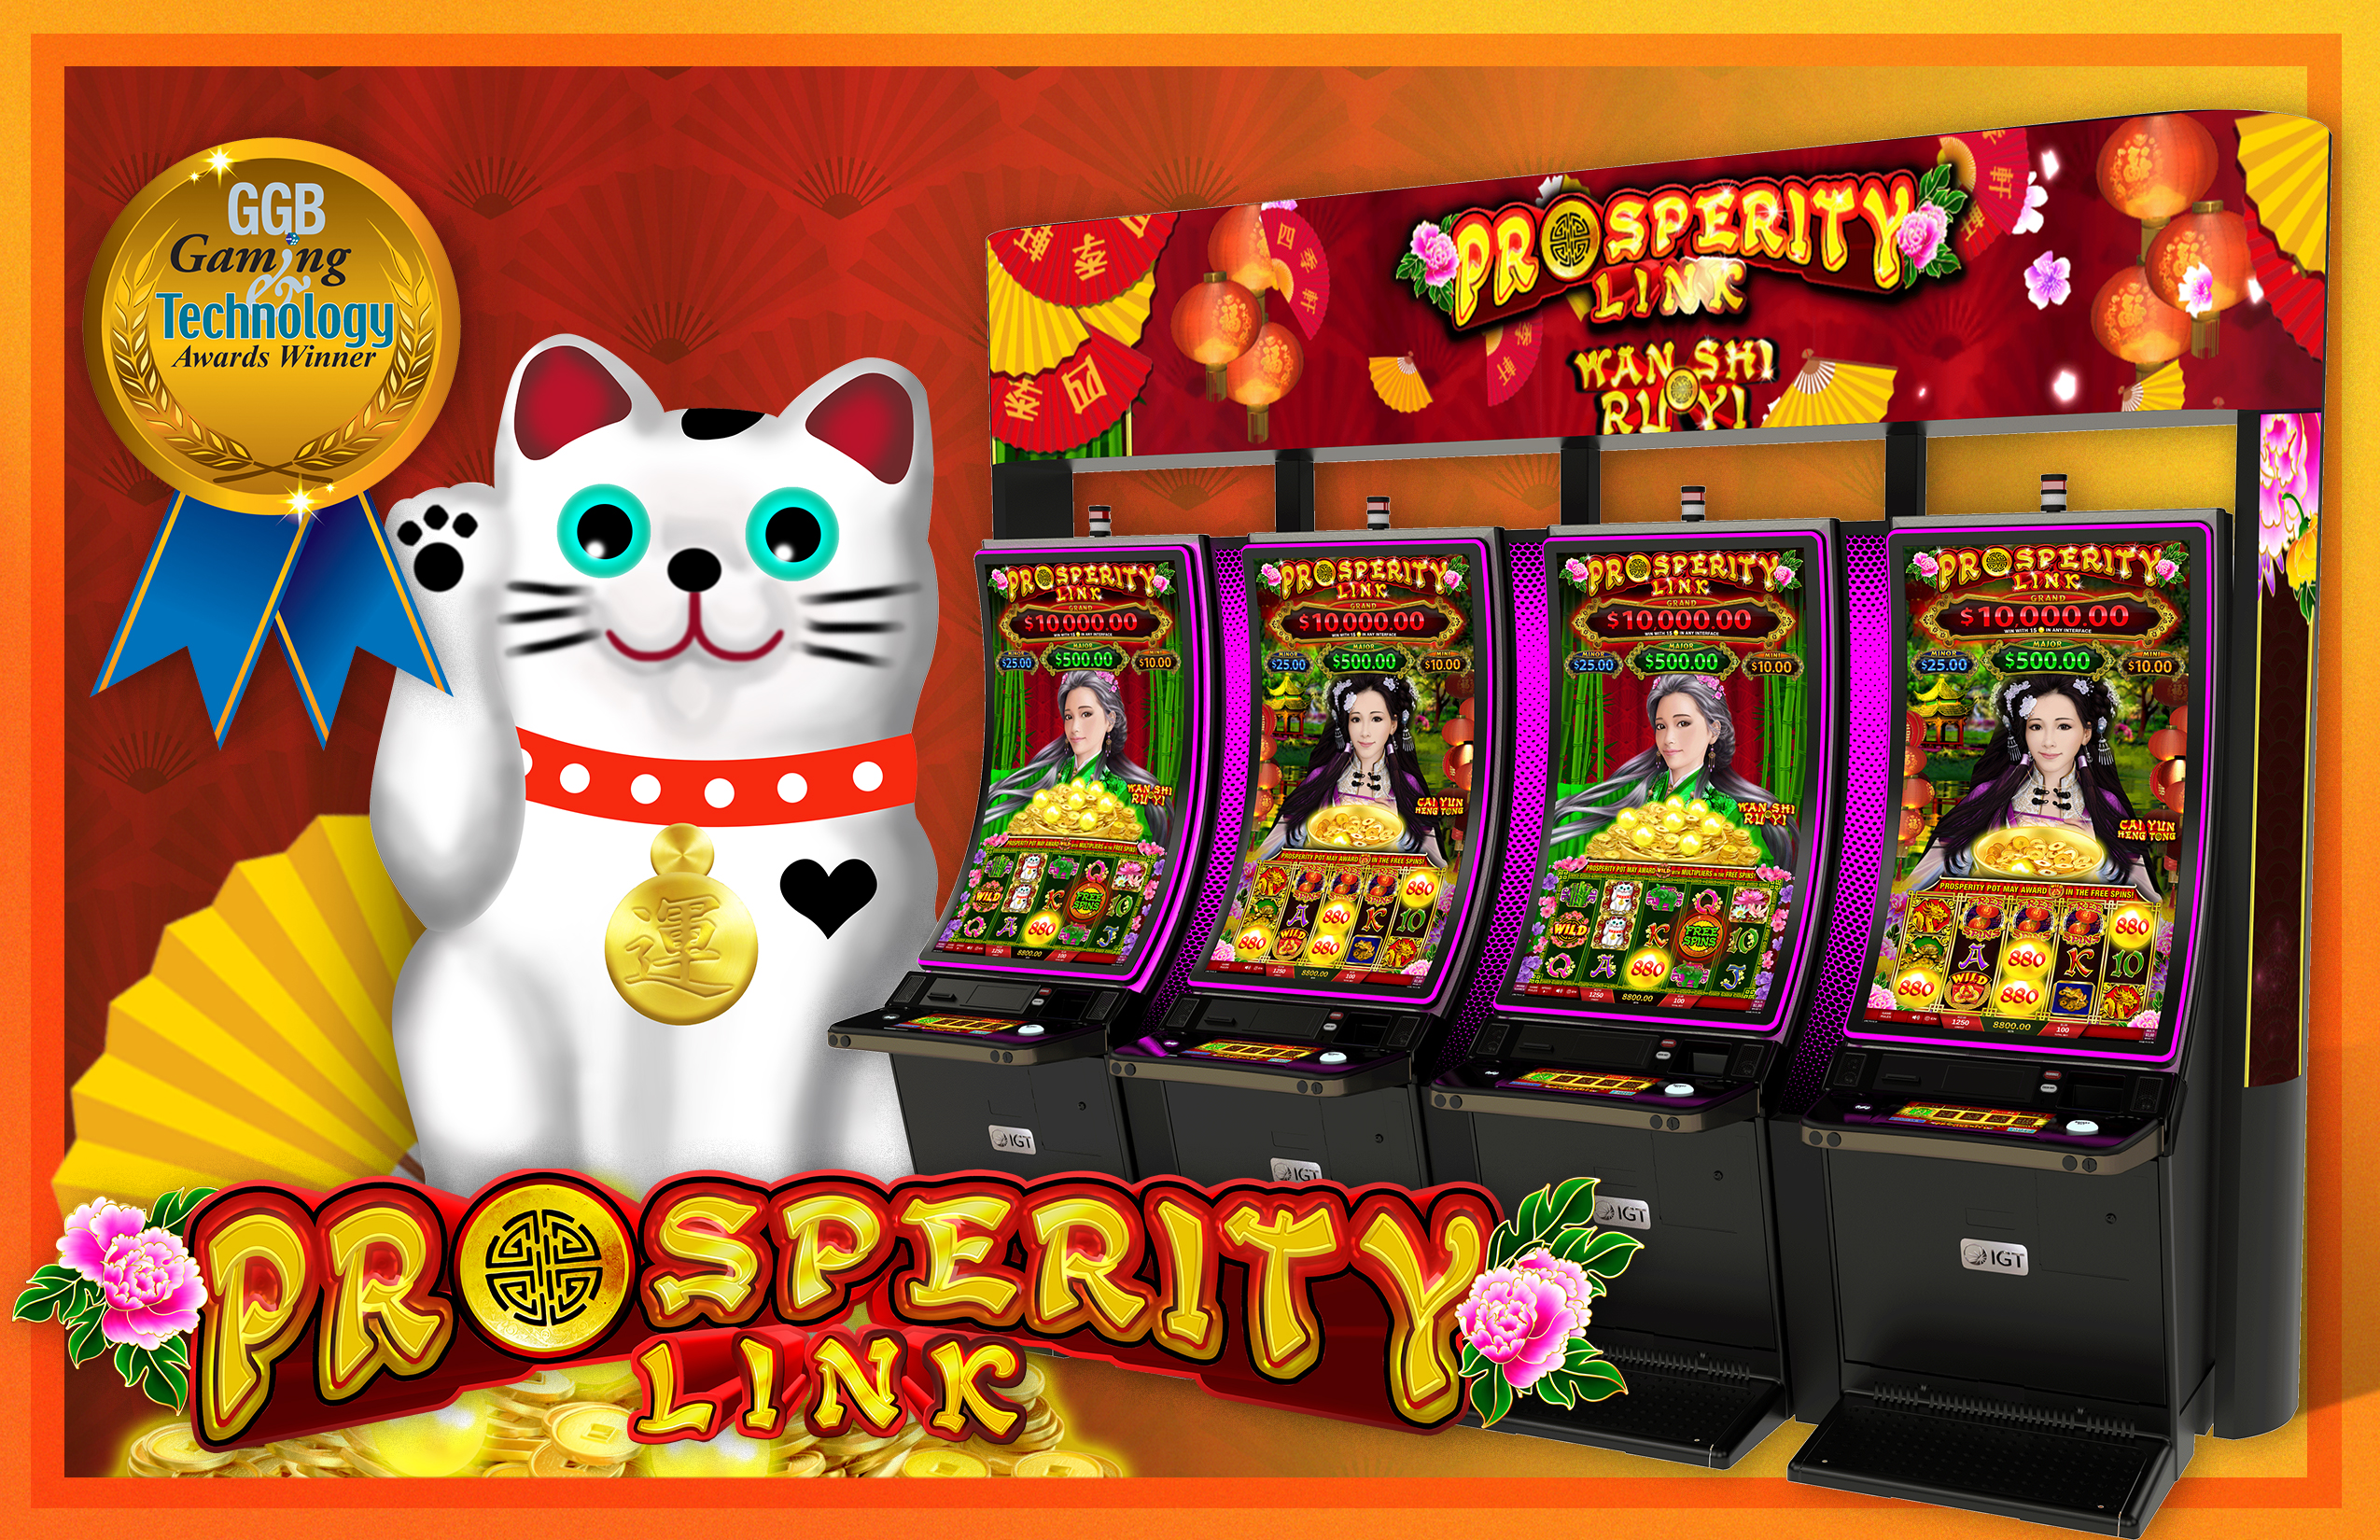 rosperity Link GGB Gaming Technology Award Winner, featuring Cat character and 4 multi-level progressive slot machine cabinets